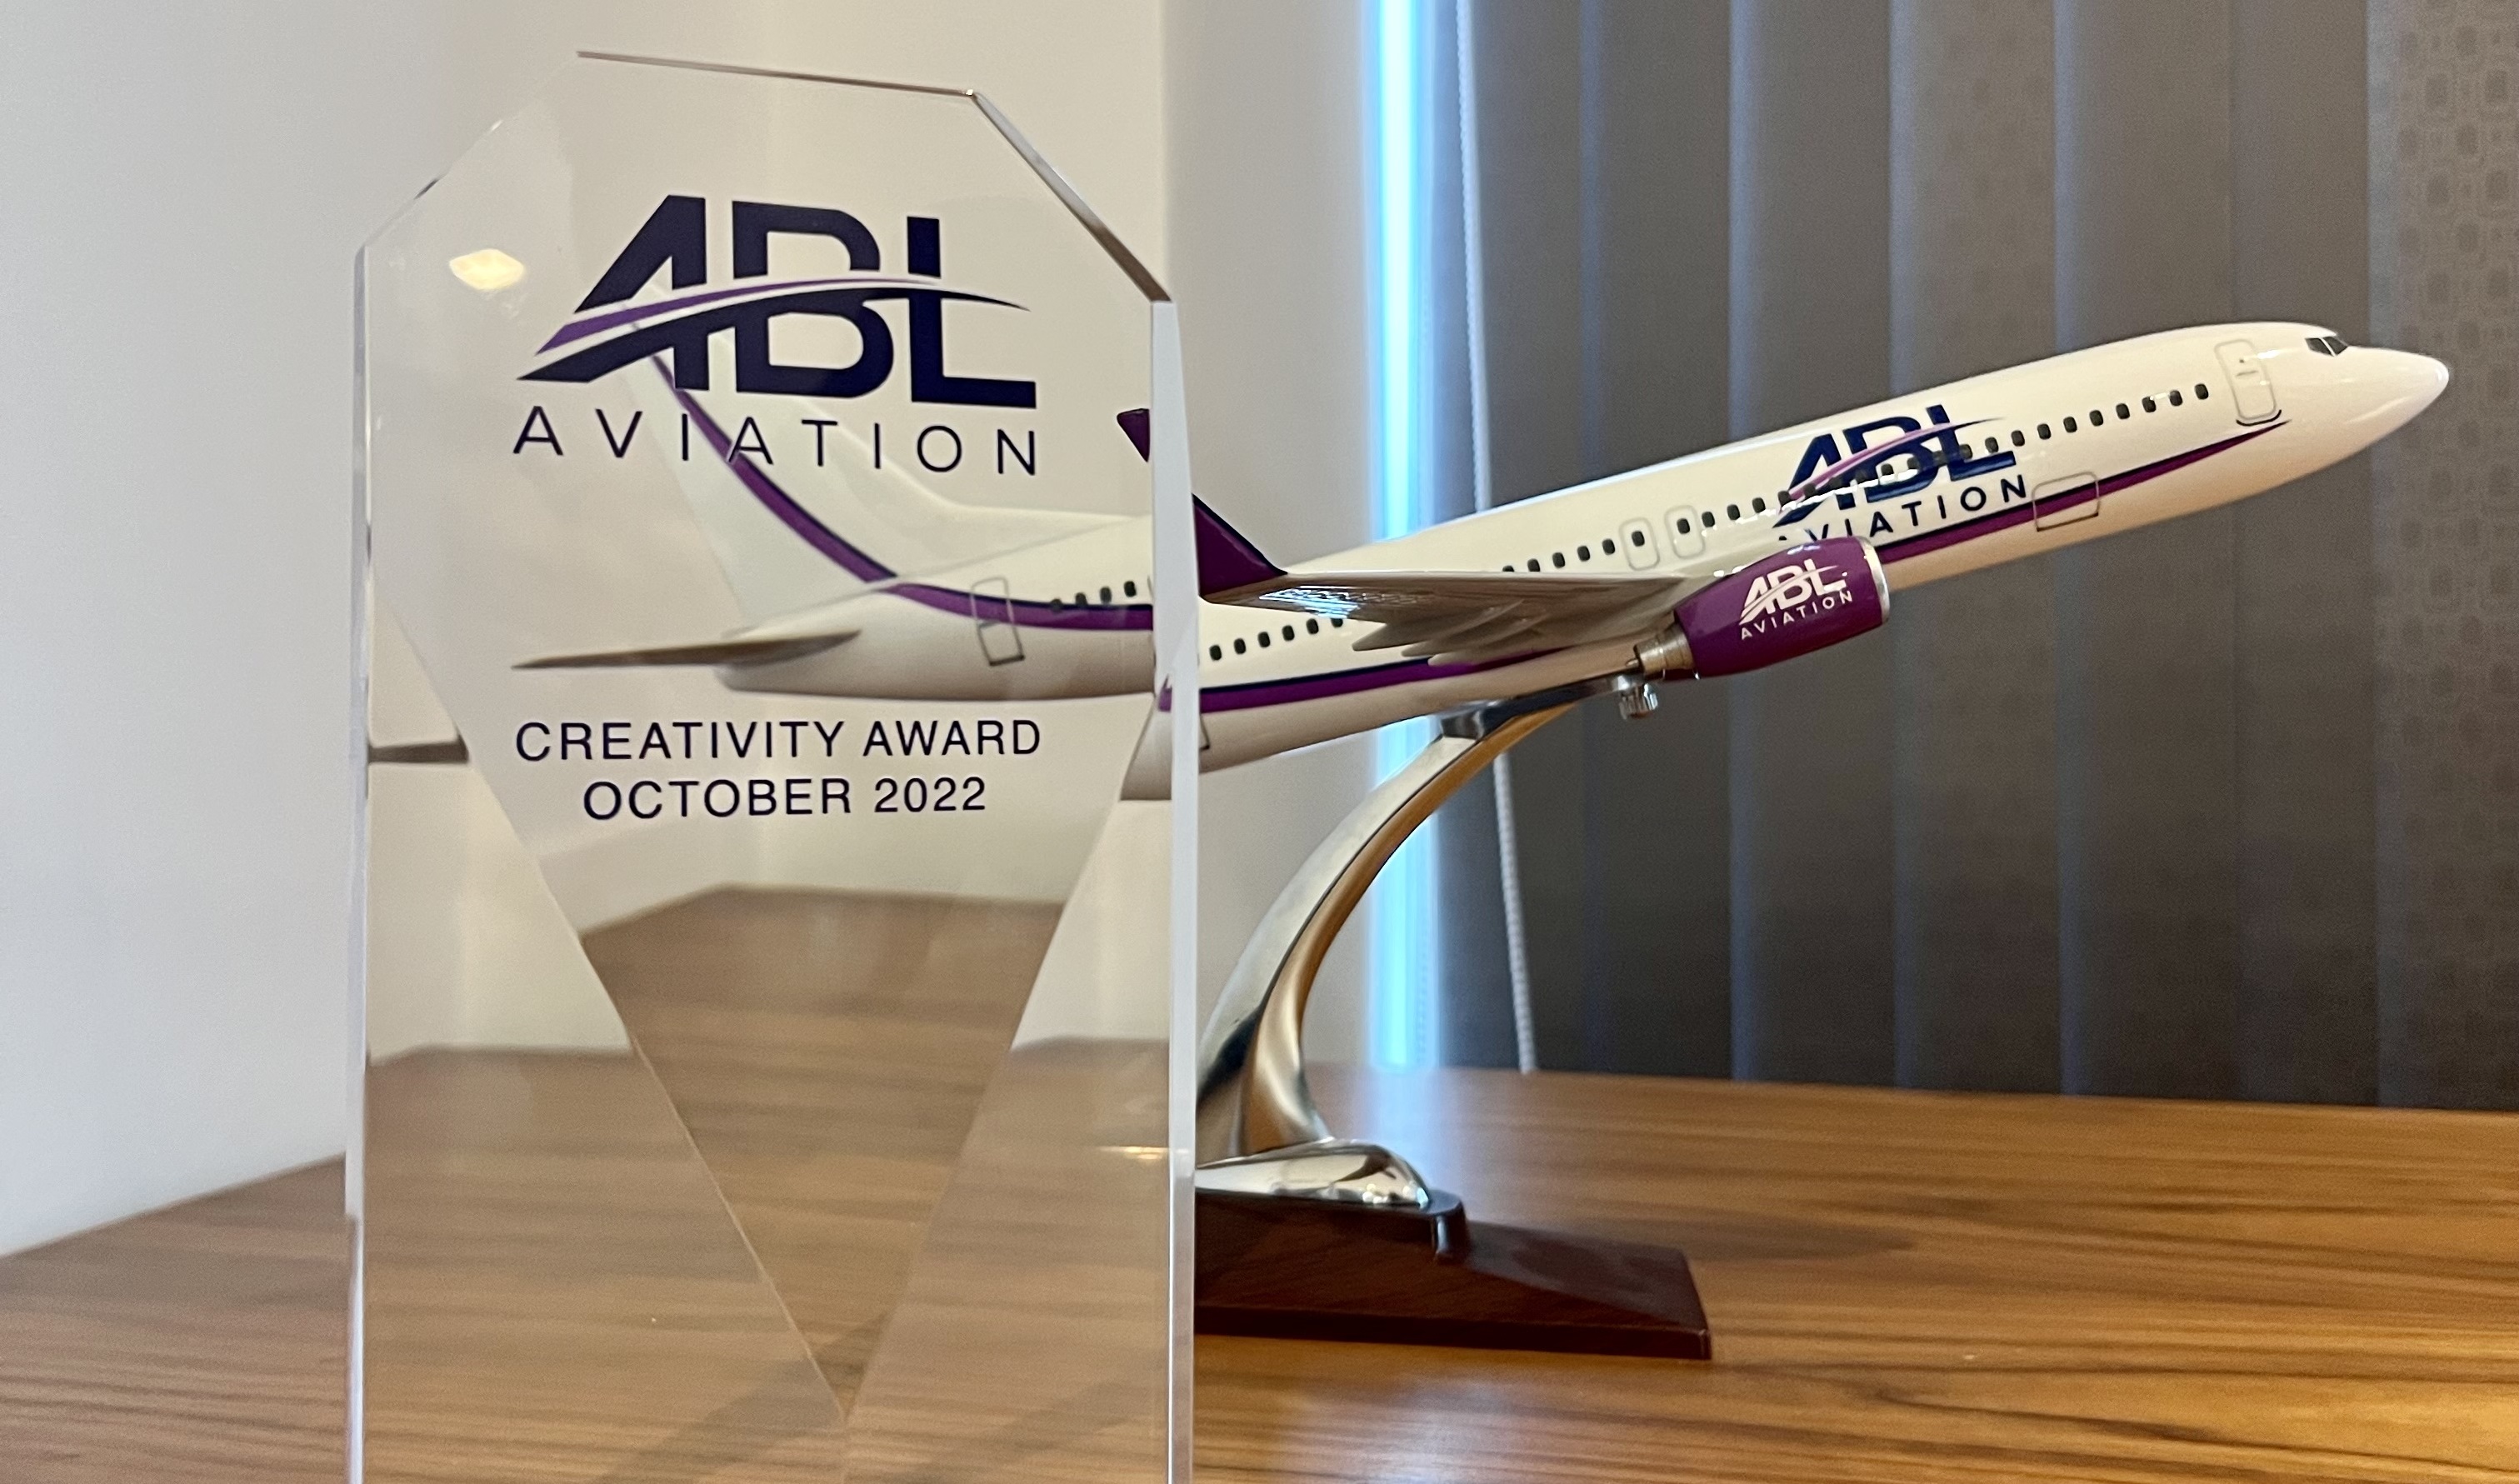 Industry Innovation Award 2022 : ABL Aviation remporte le prix « Real Asset and Infrastructure »